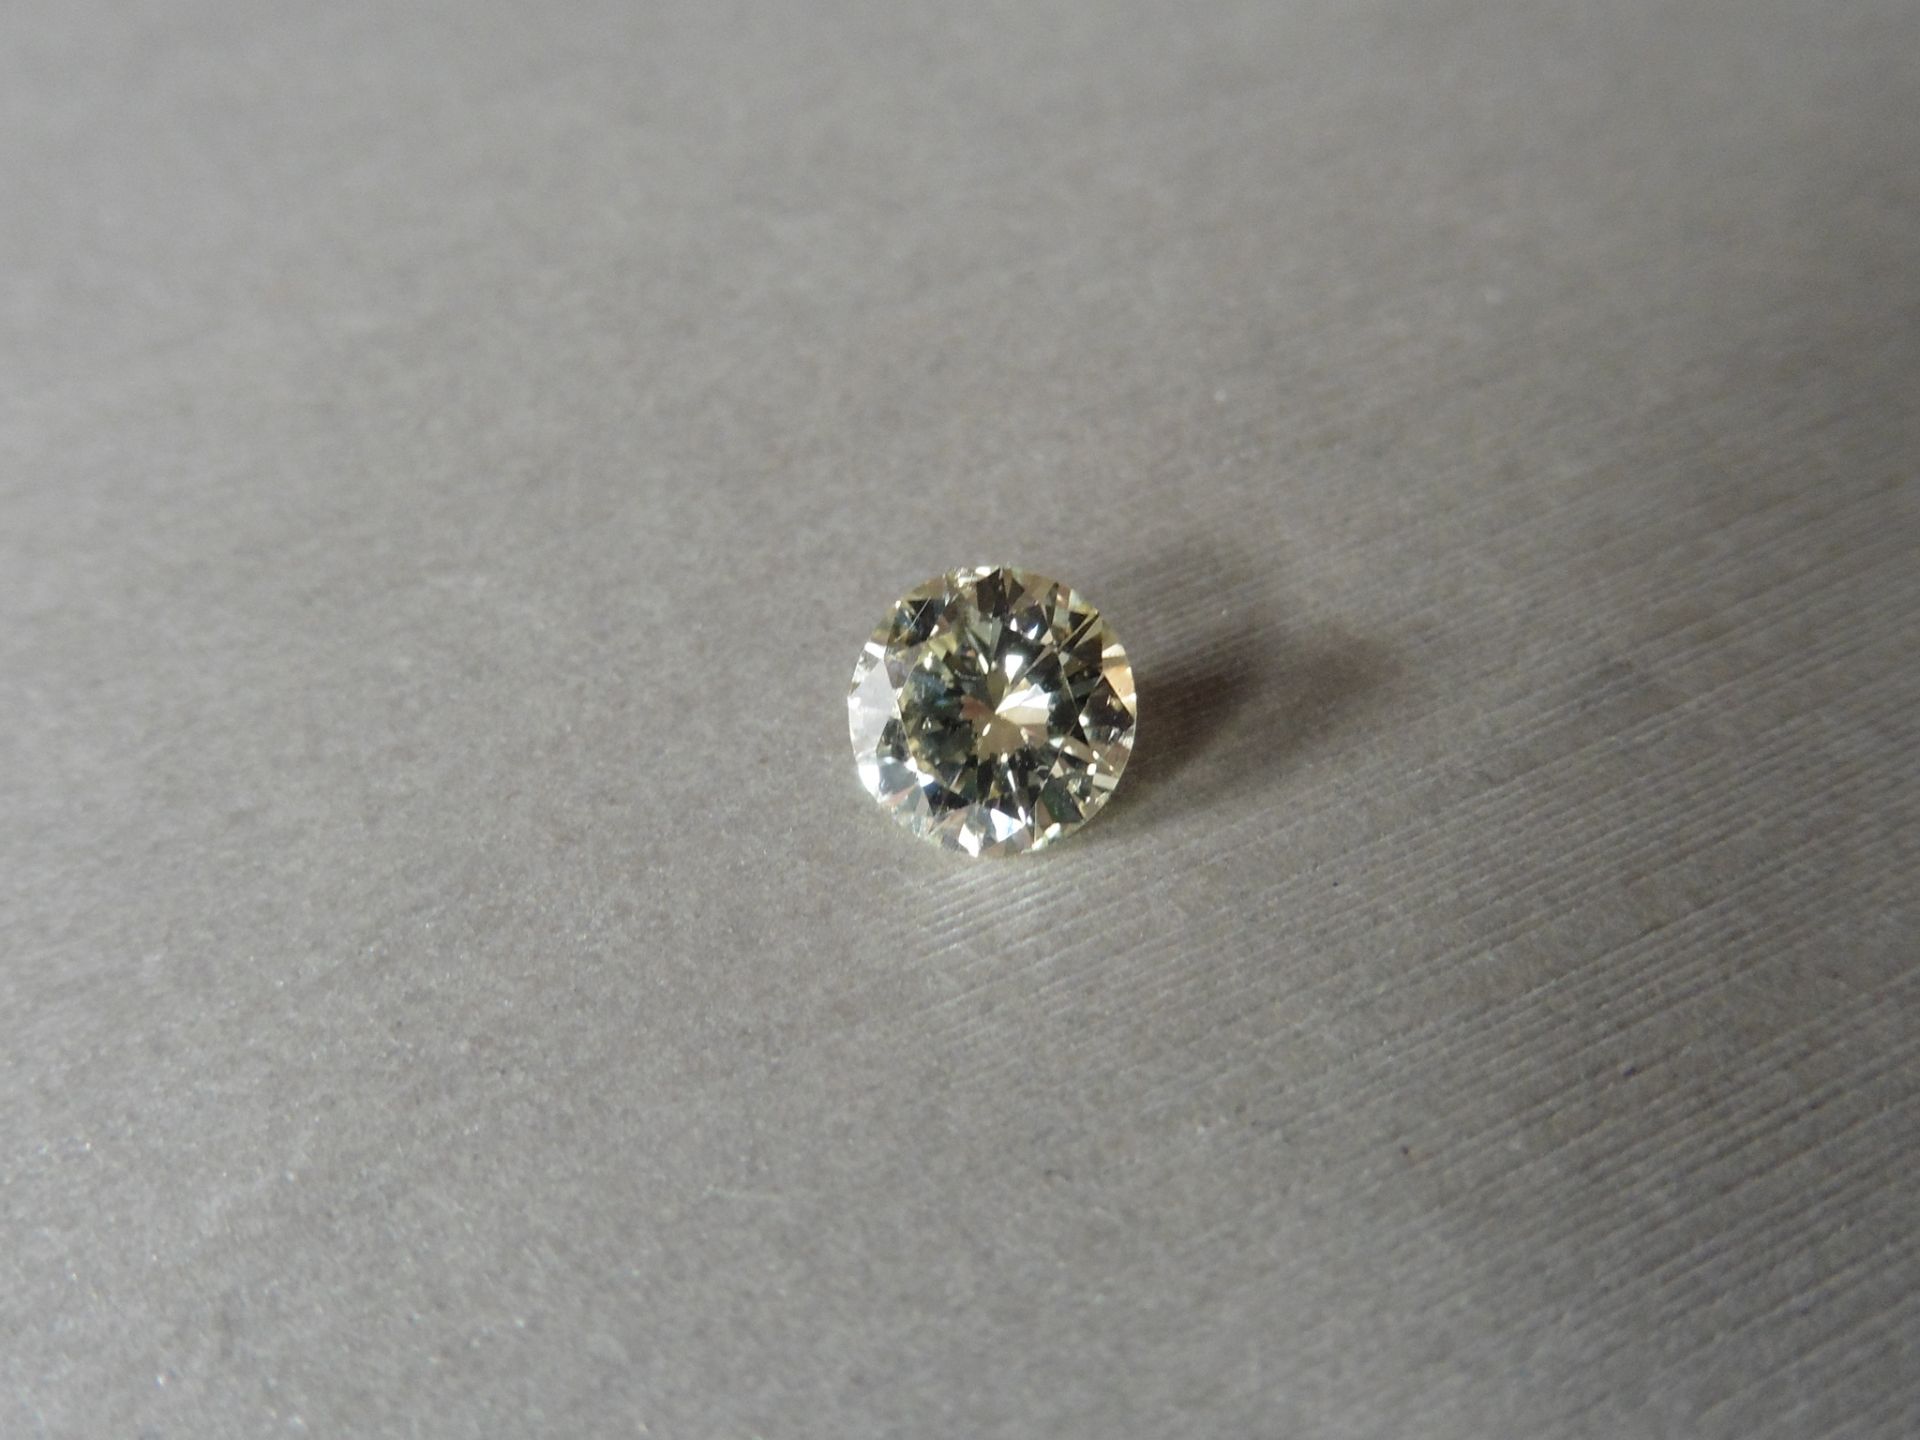 1.08ct loose brilliant cut diamond measuring 6.74 x 3.9mm. K Colour and VS1 clarity. Valued at £